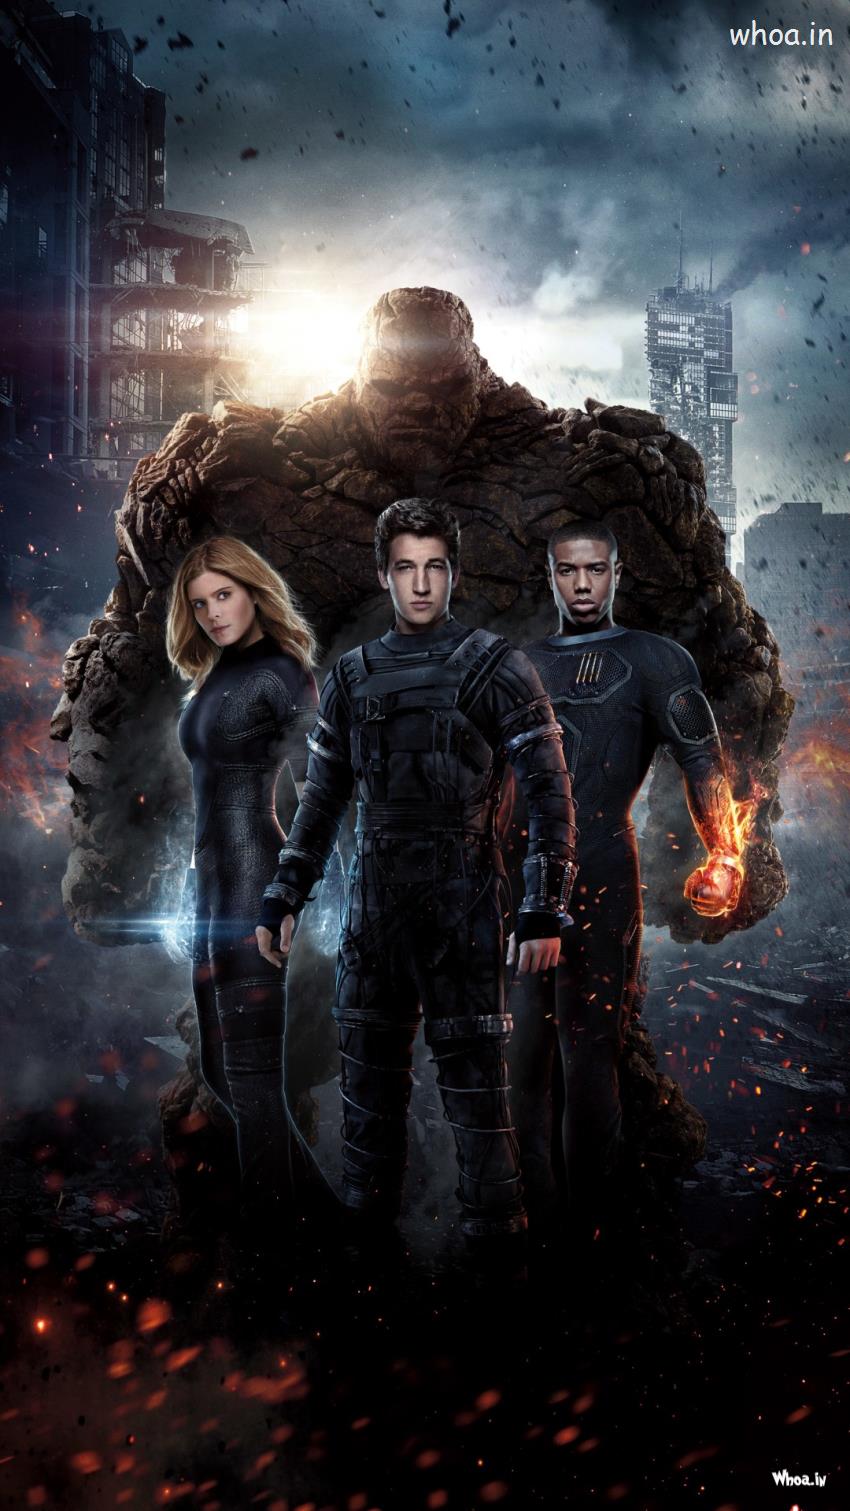 Fantastic 4 Hollywood Action Movies Poster 2015